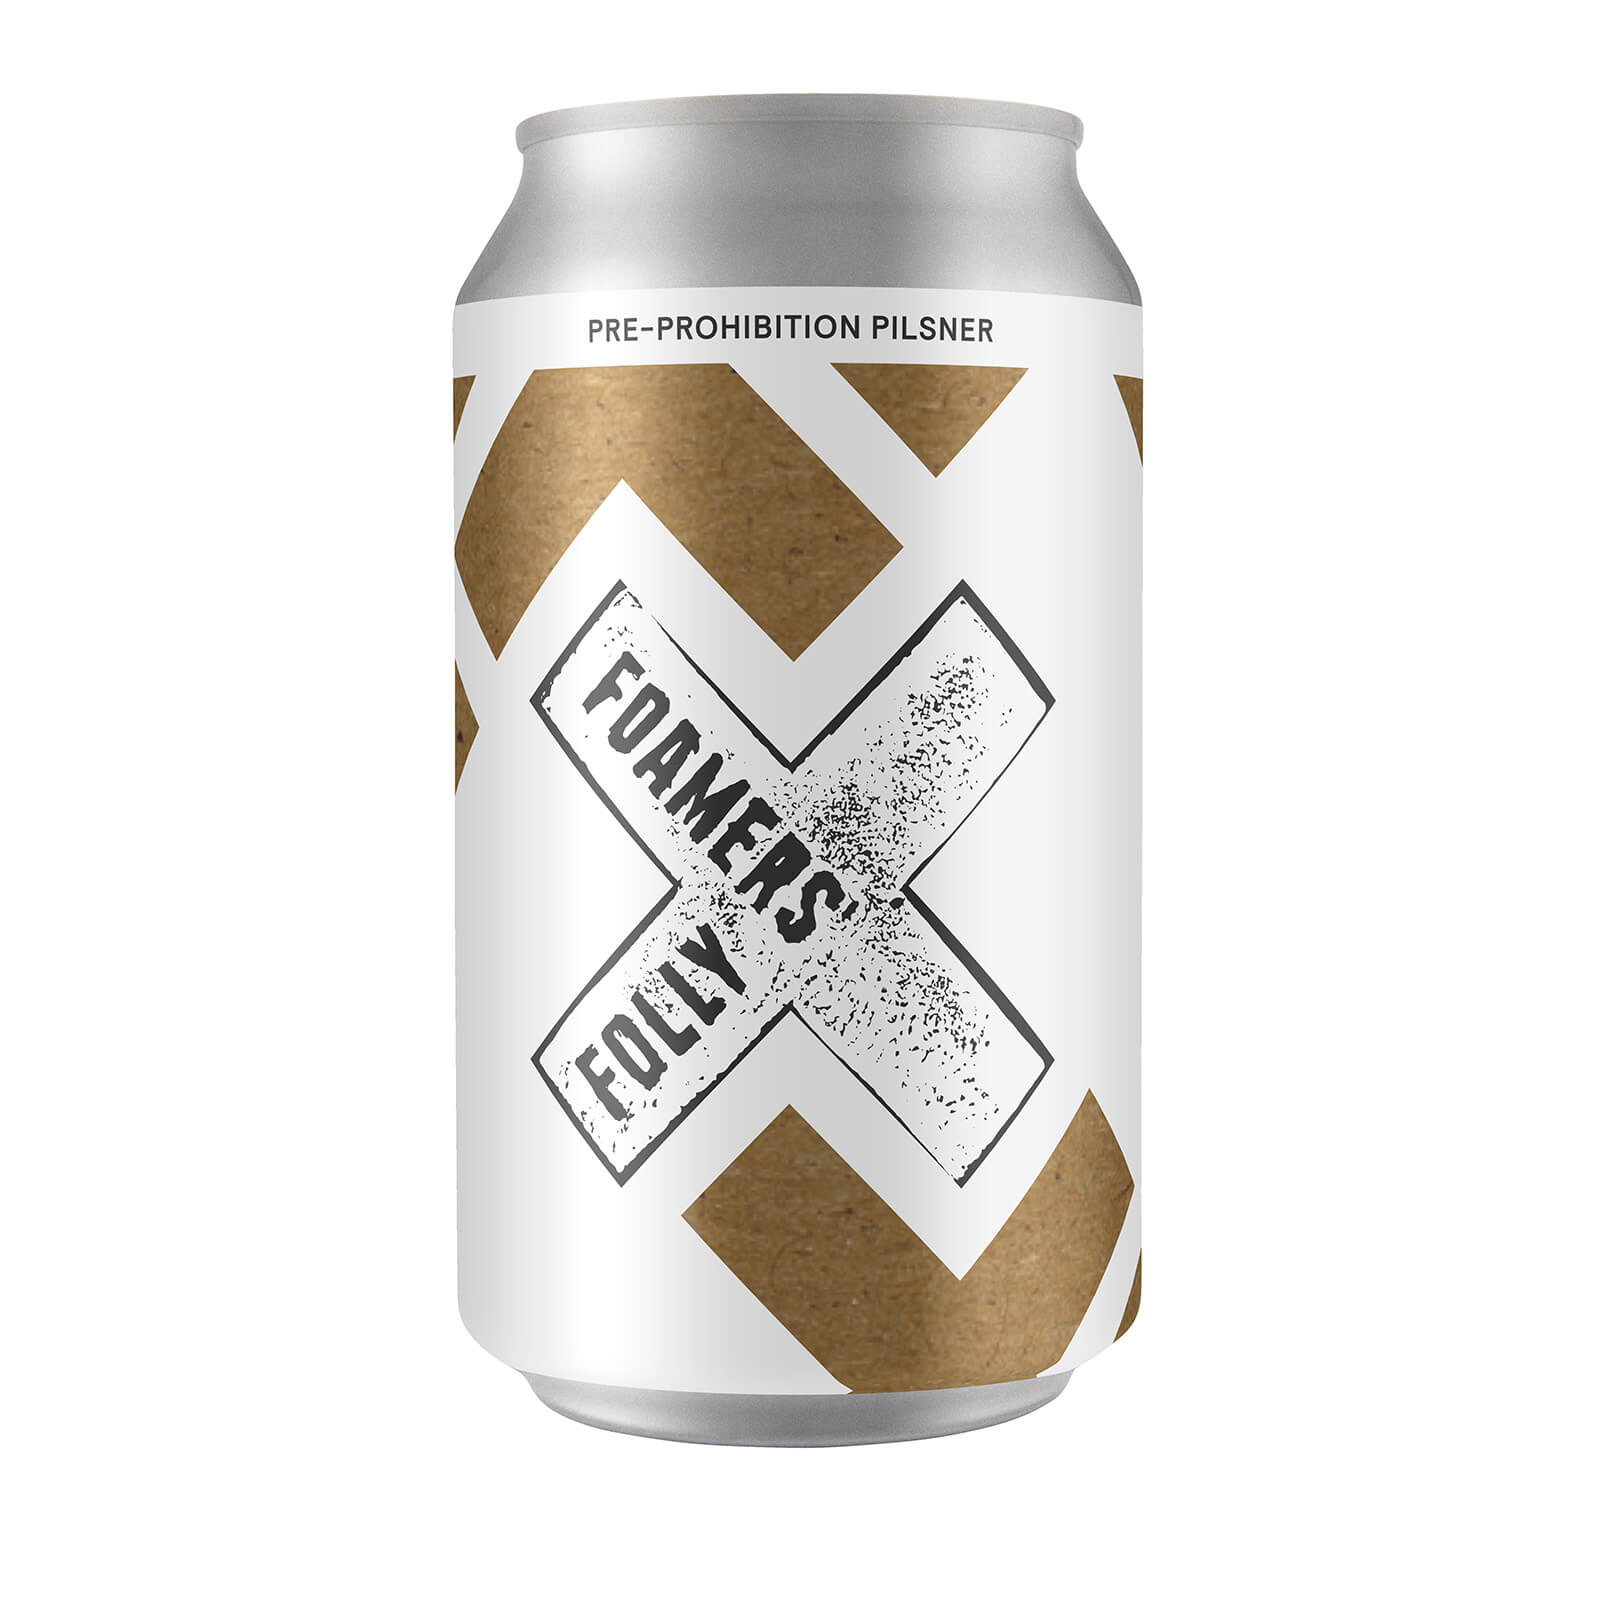 Foamers' Folly Brewing Co. Pre-Prohibition Pilsner can design